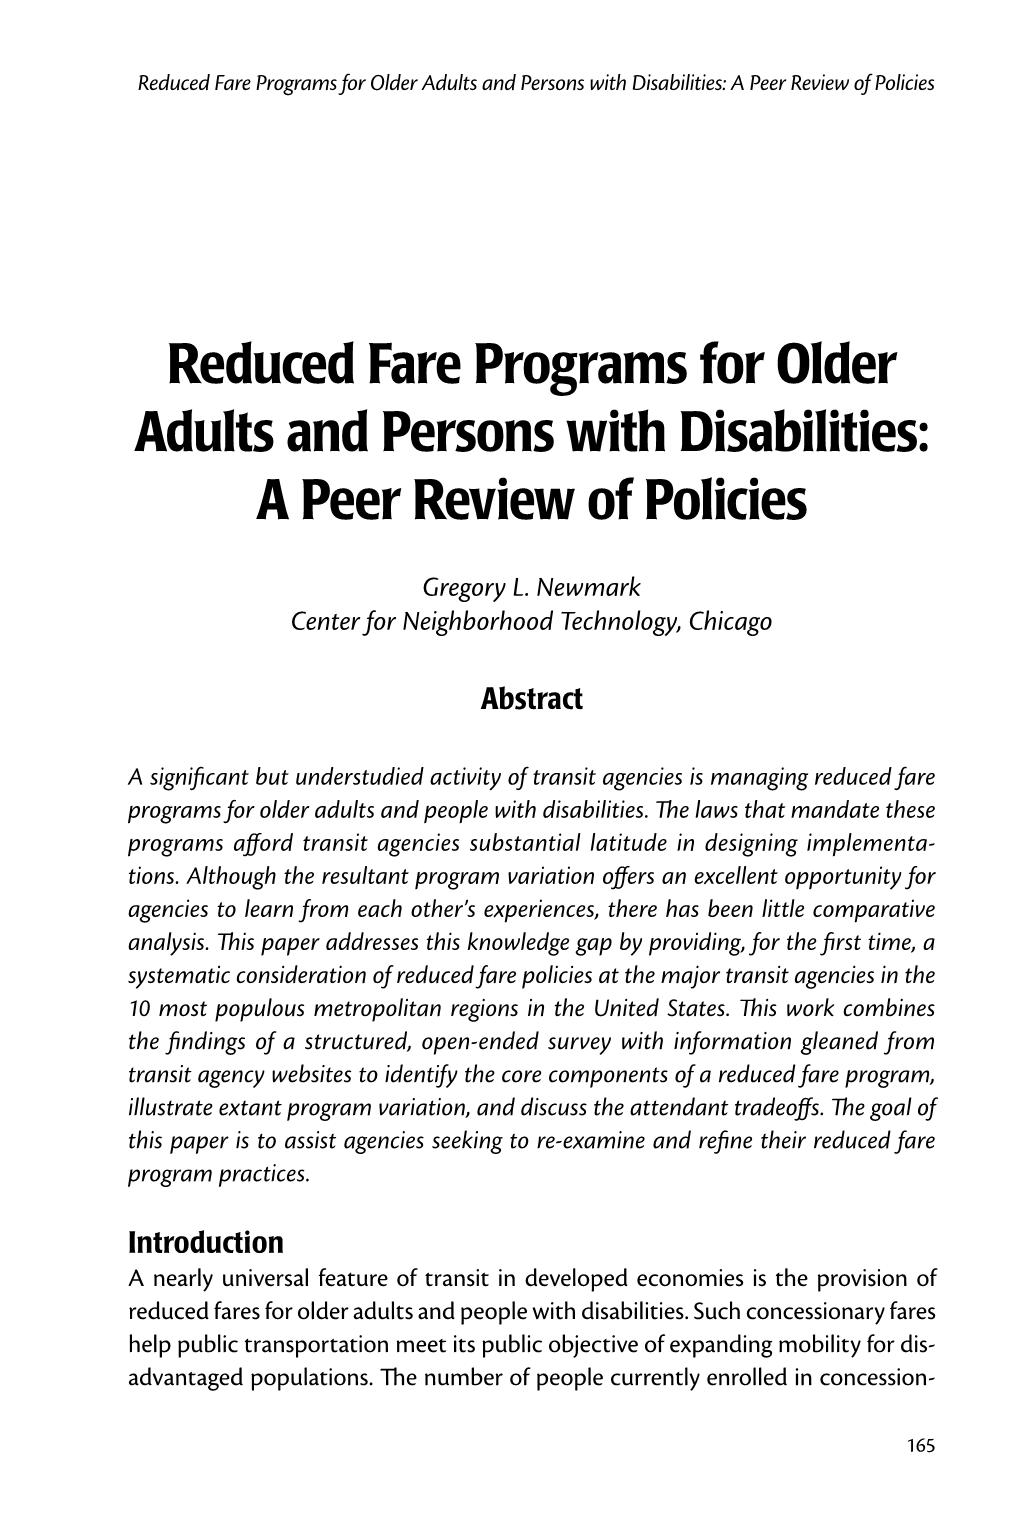 Reduced Fare Programs for Older Adults and Persons with Disabilities: a Peer Review of Policies